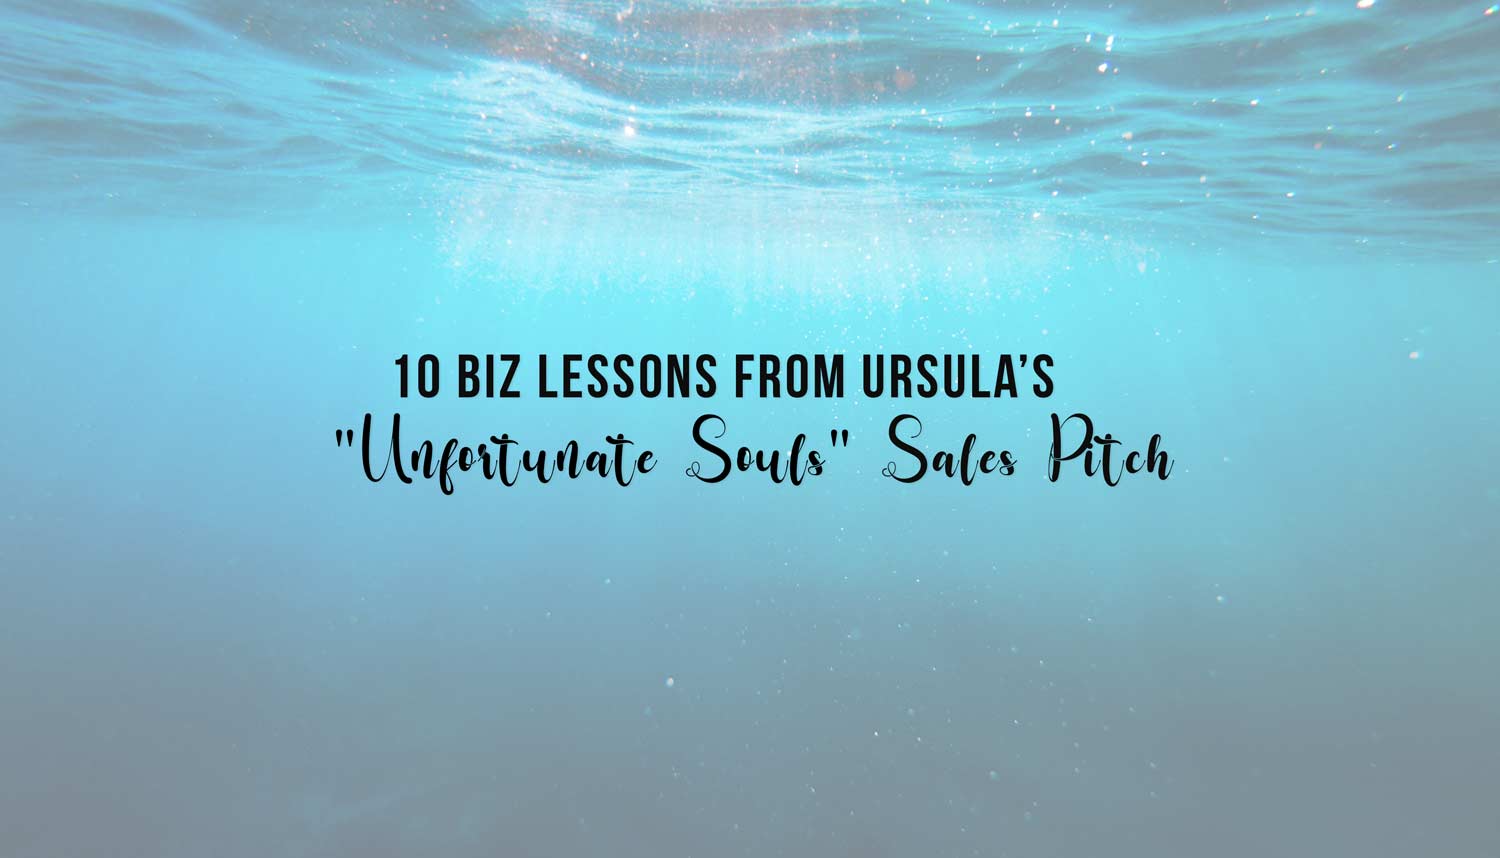 10 Biz Lessons From Ursula’s "Unfortunate Souls" Sales Pitch